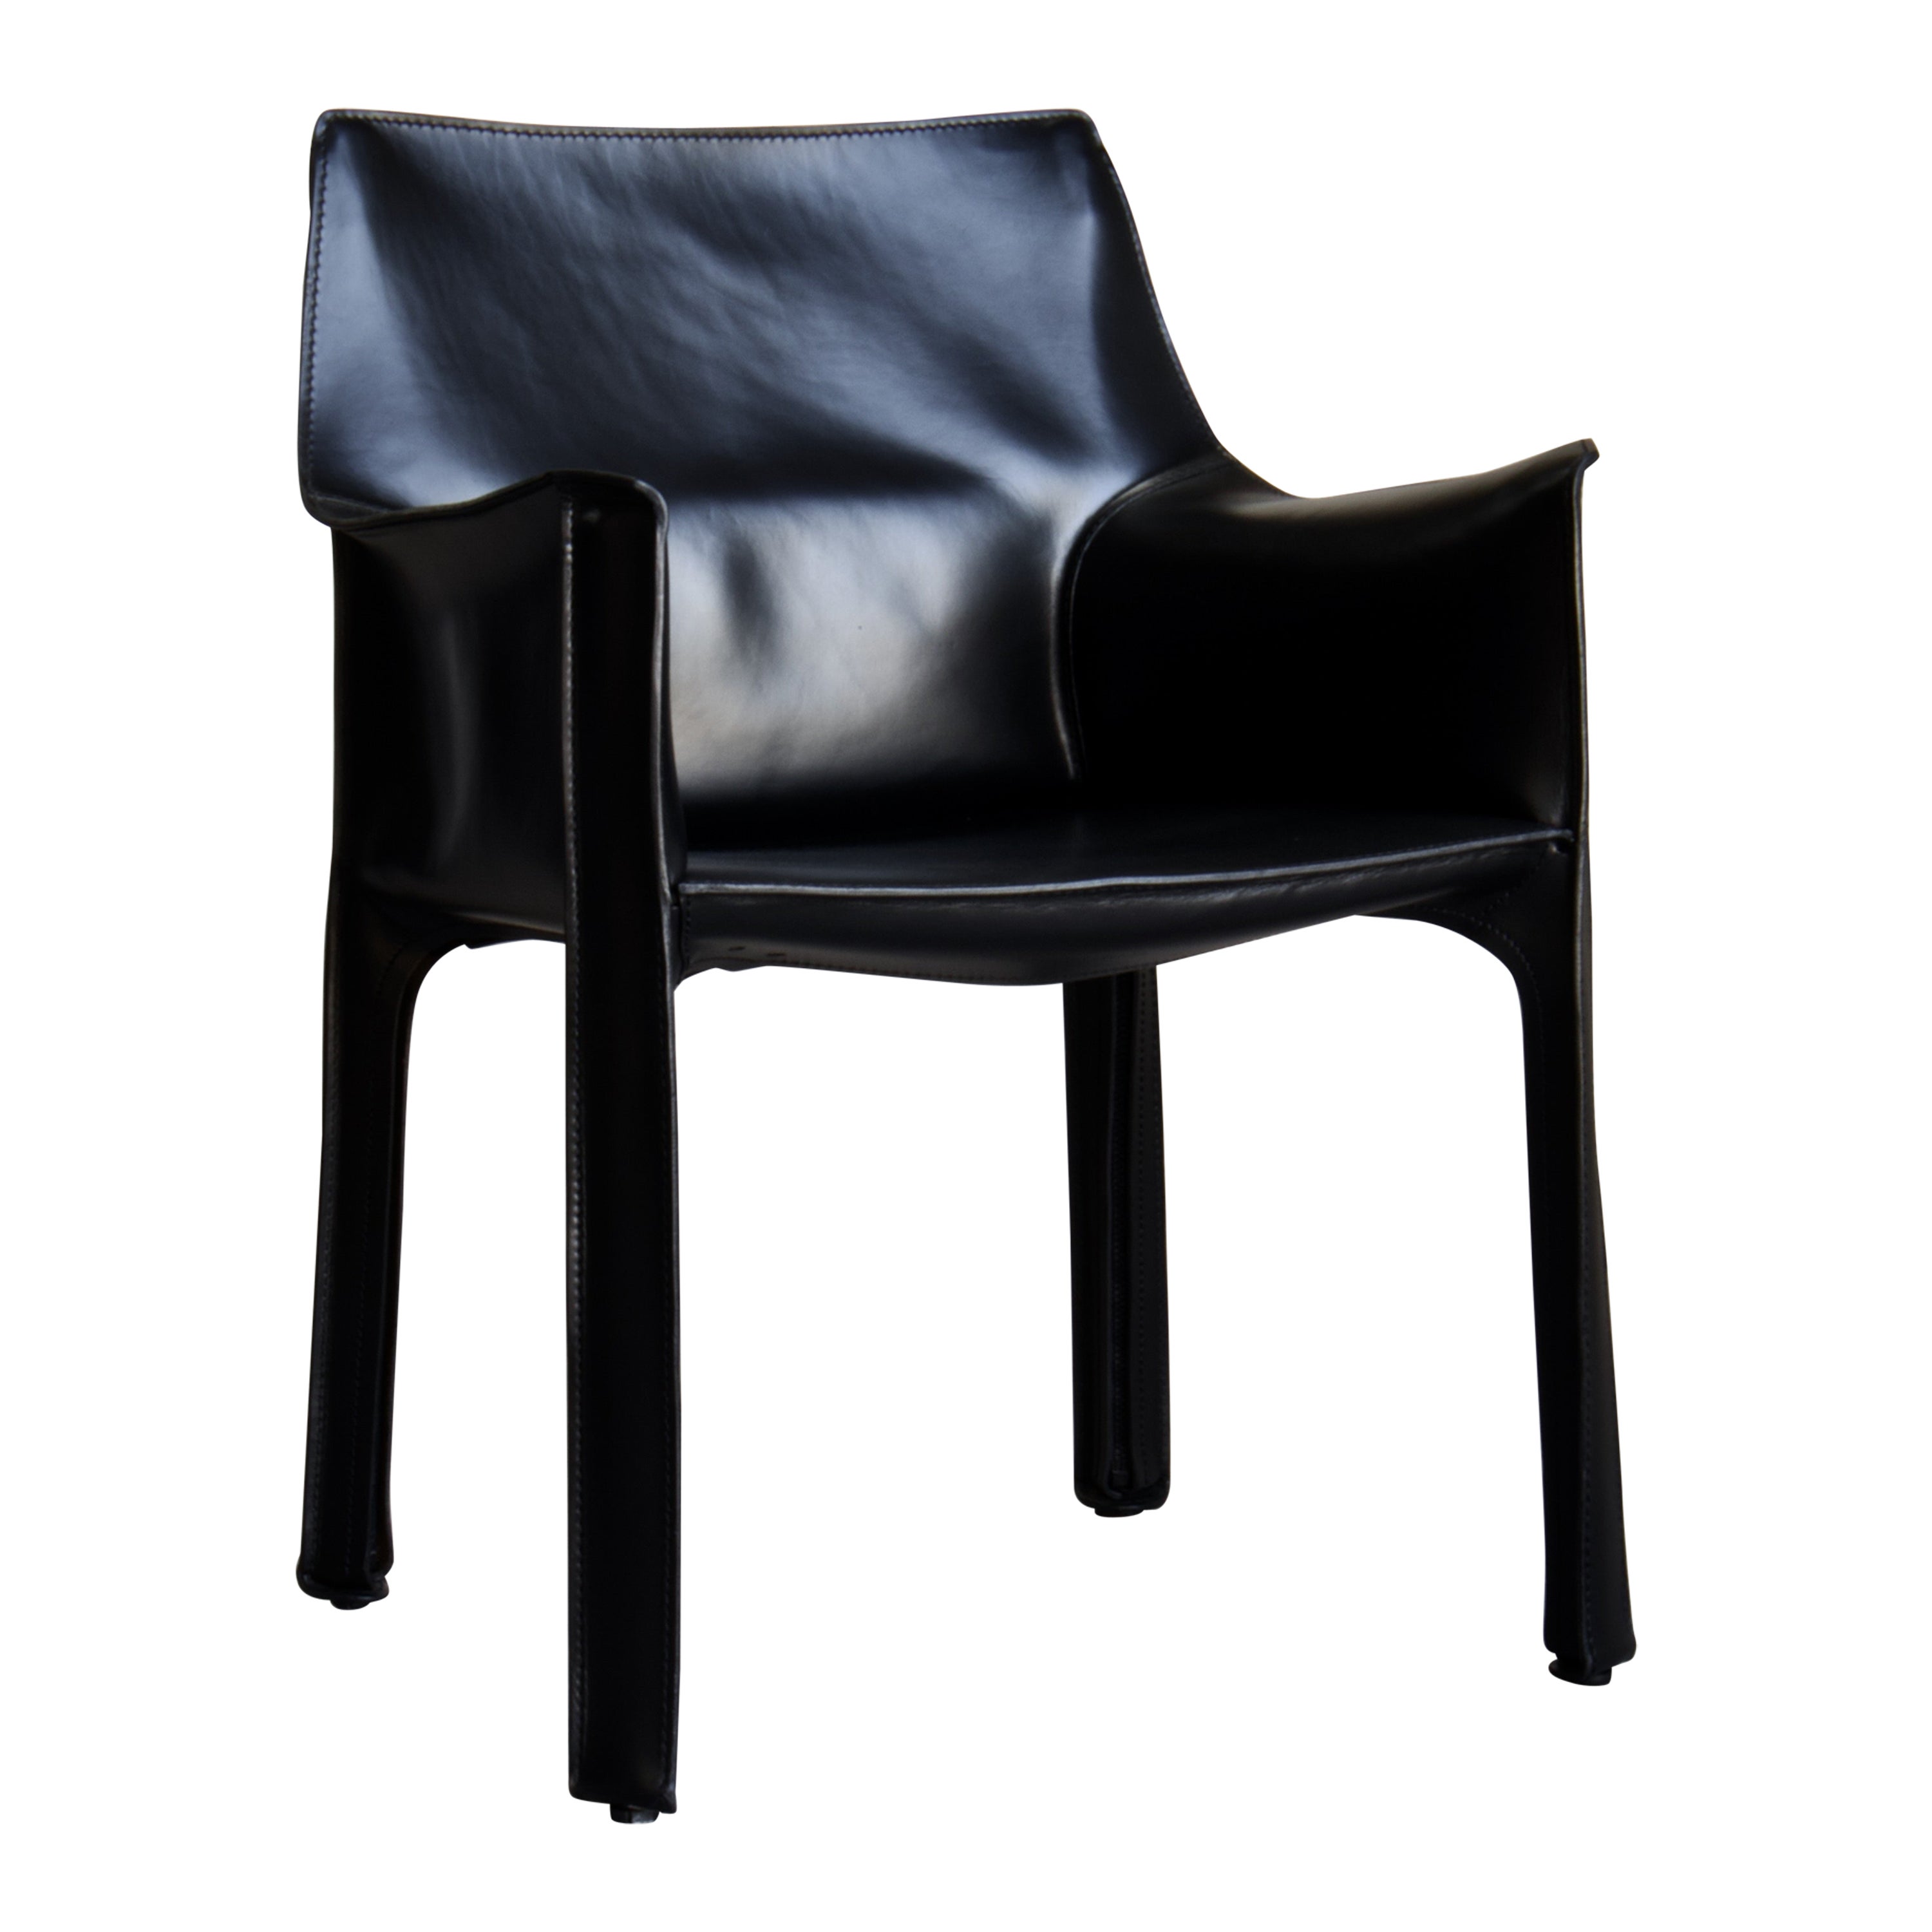 8 Mario Bellini CAB 413 Armchairs in Black Leather for Cassina, 1980s Italy